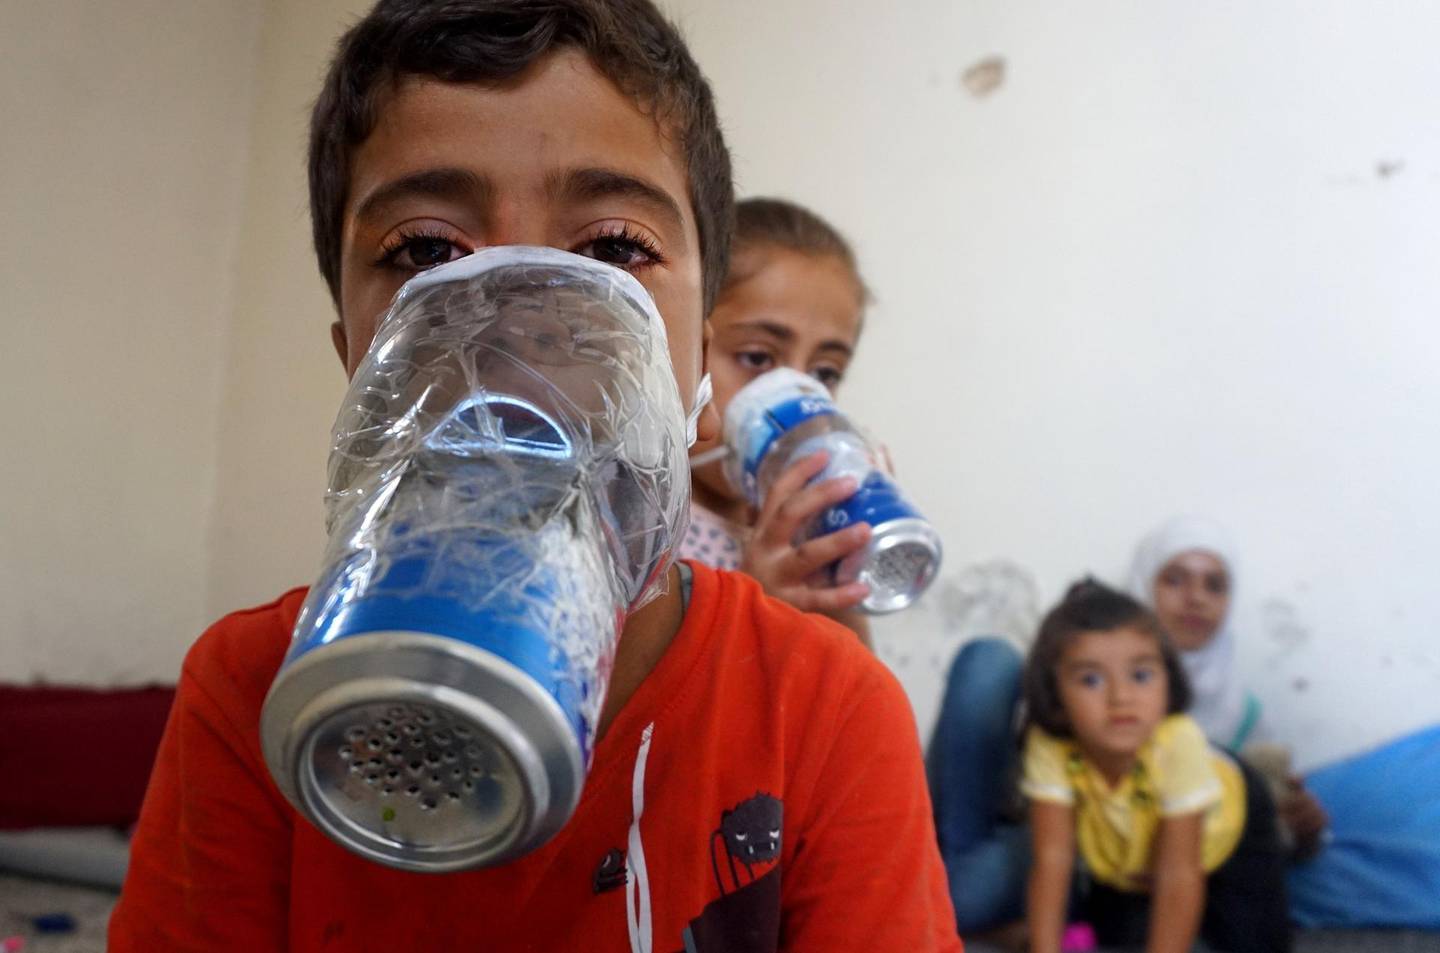 TOPSHOT - Children try improvised gas masks in their home in Binnish in Syria's rebel-held northern Idlib province as part of preparations for any upcoming raids on September 12, 2018. - The Syrian regime and its Russian ally are threatening an offensive to retake the northwestern province of Idlib, Syria's last rebel bastion. (Photo by Muhammad HAJ KADOUR / AFP)